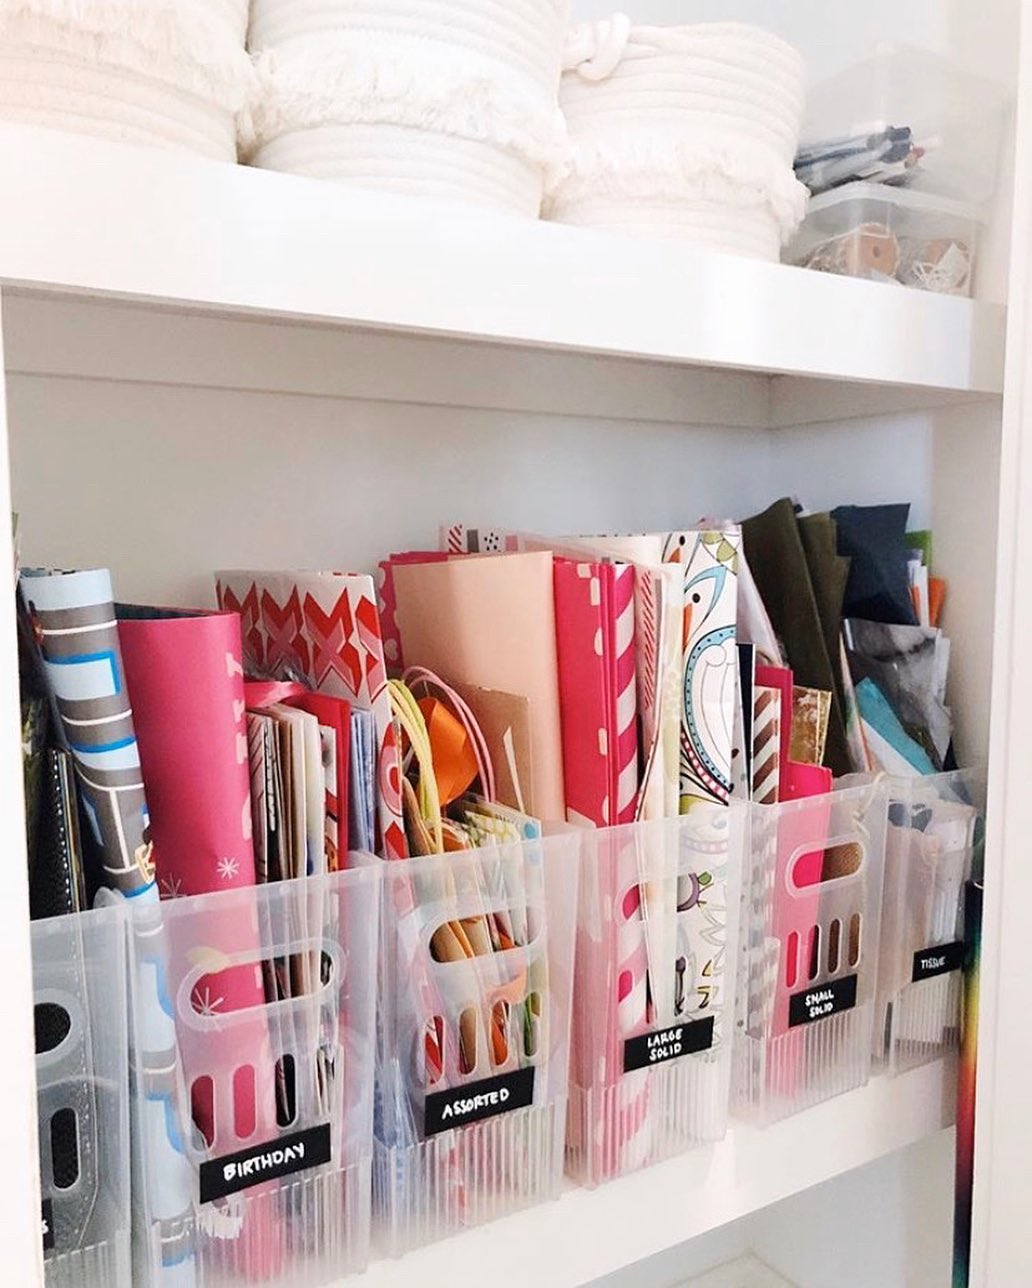 Magazine racks holiday gift materials. Photo by Instagram user @getminimized